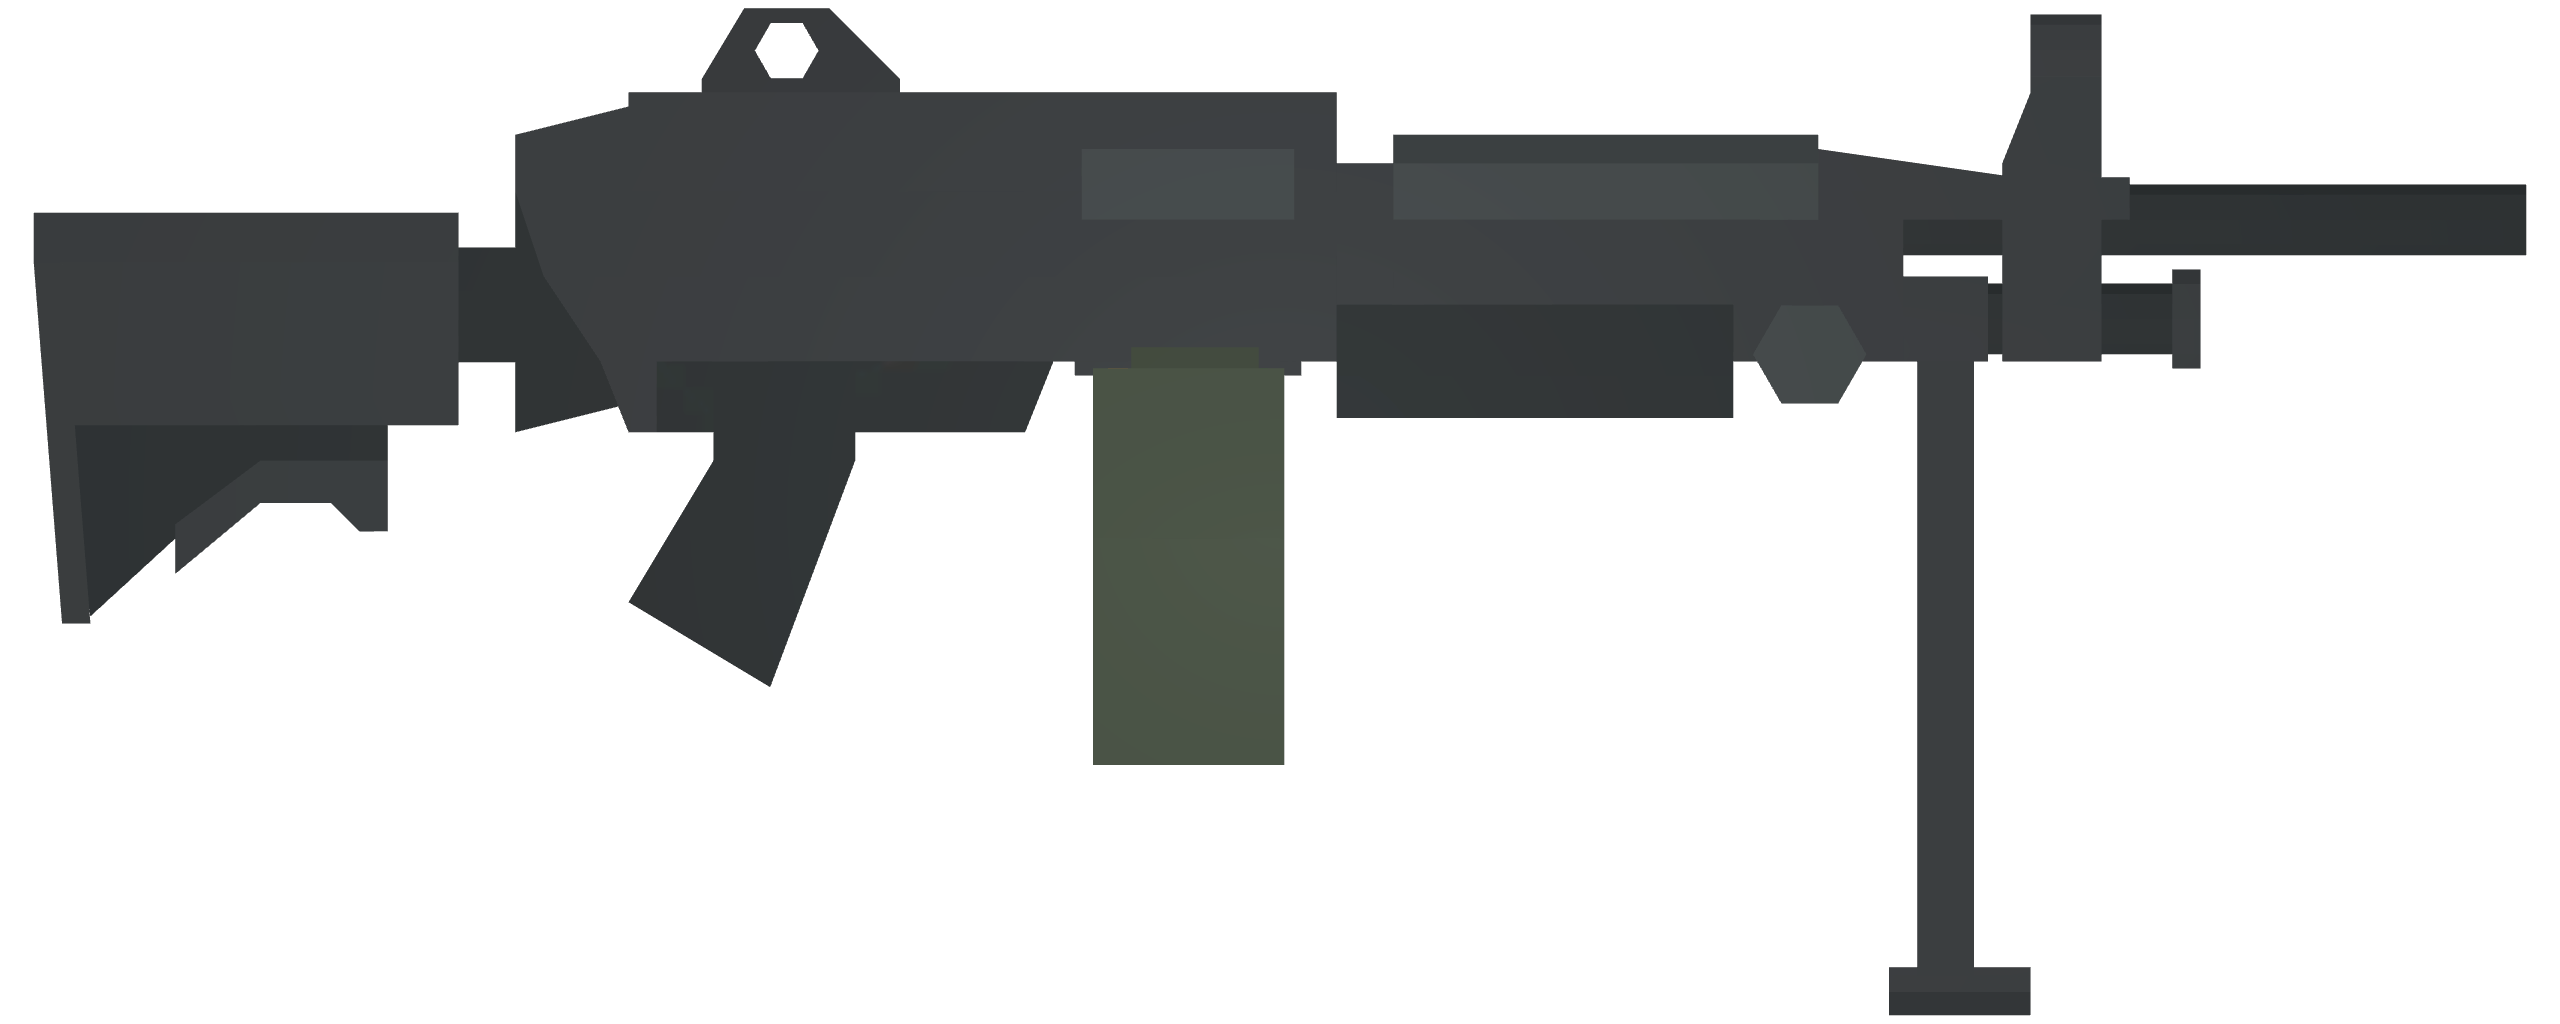 Unturned - All Weapons ID's for Uncreated Warfare Mods - USA Weapons - 1AEF10B